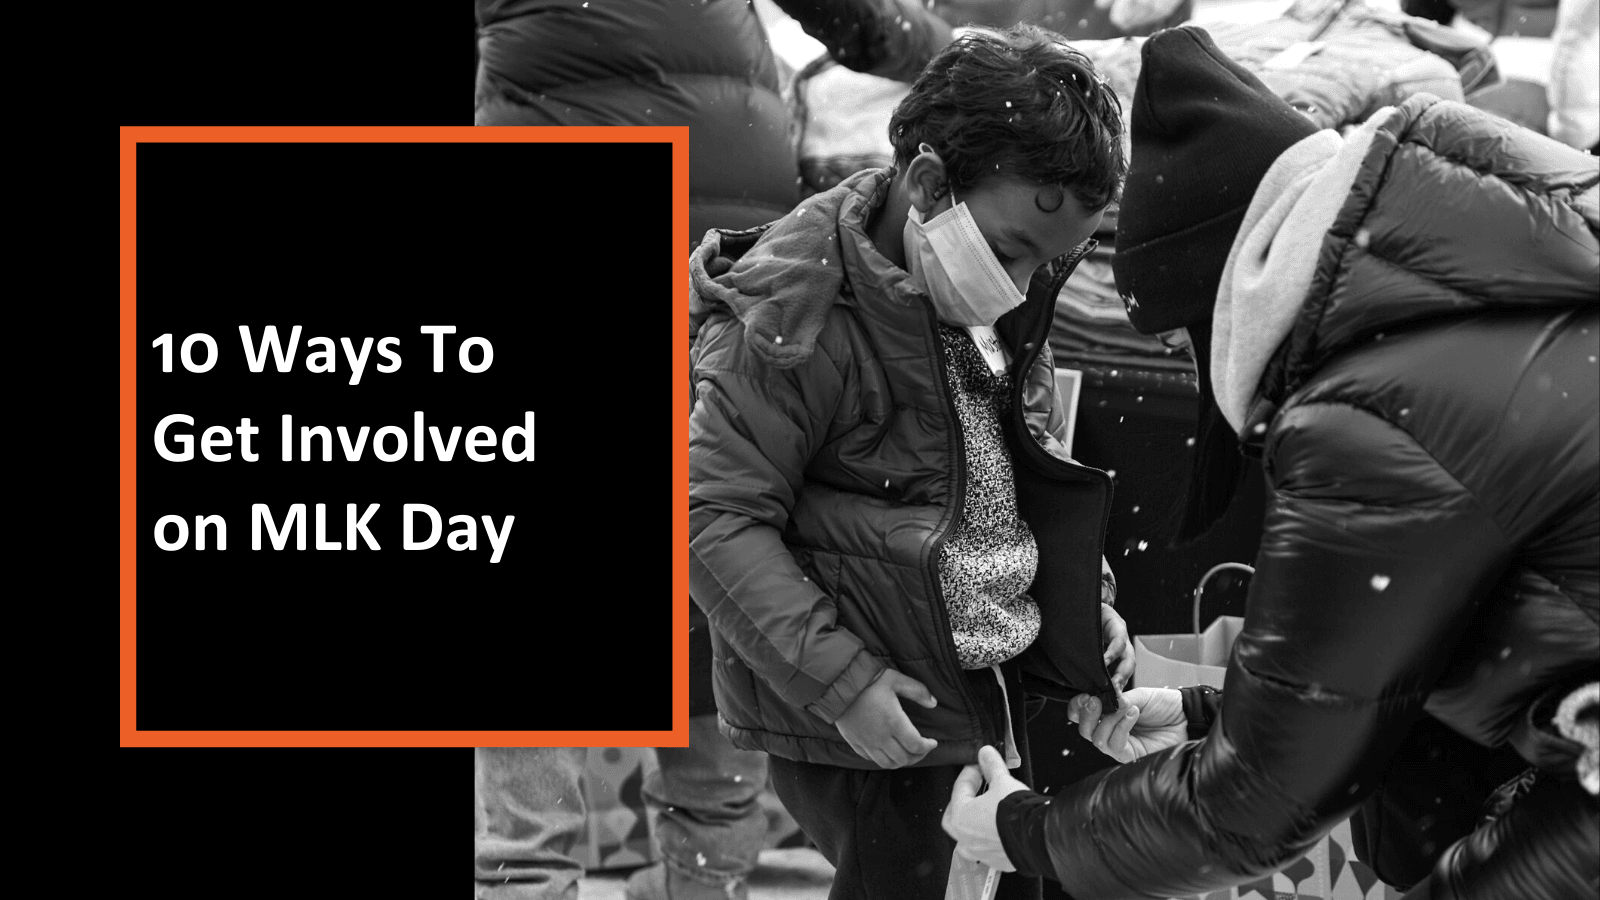 10 Ways To Get Involved on MLK Day